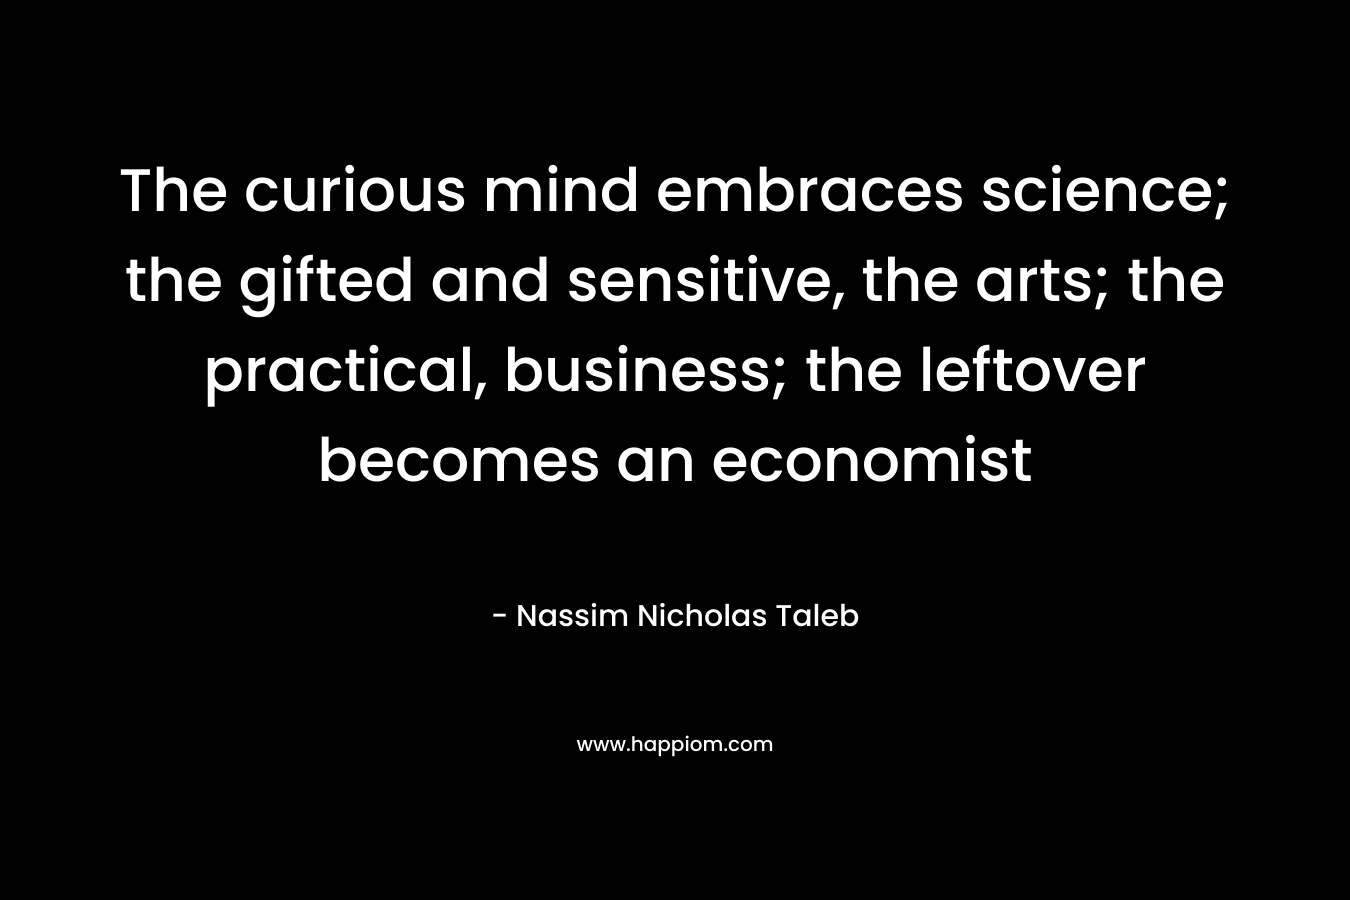 The curious mind embraces science; the gifted and sensitive, the arts; the practical, business; the leftover becomes an economist – Nassim Nicholas Taleb